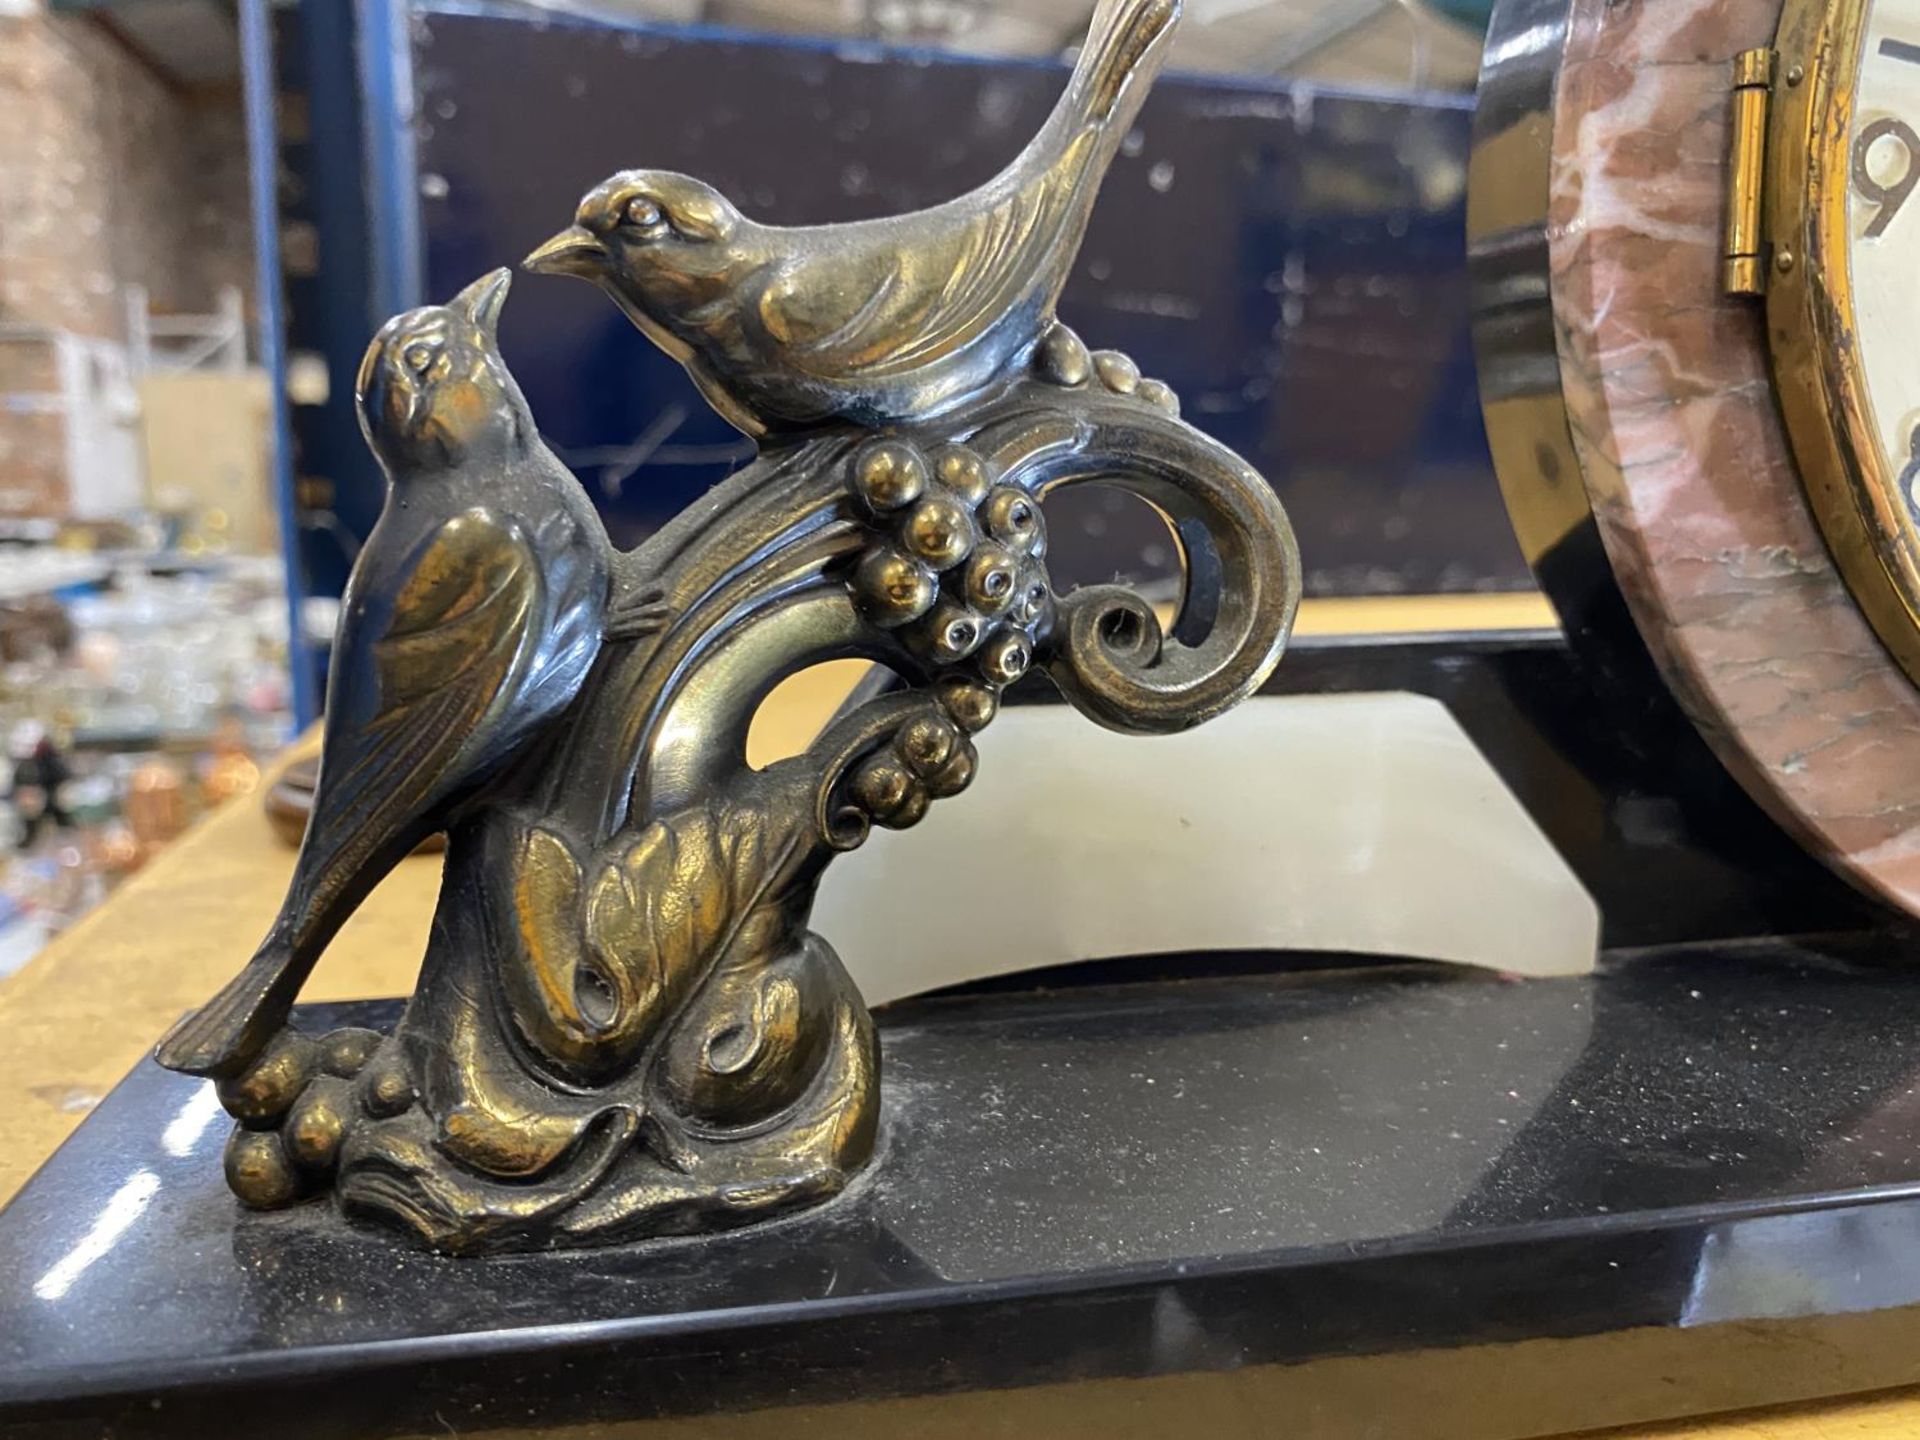 AN ART DECO MARBLE MANTLE CLOCK WITH BRASS BIRD DESIGN - Image 2 of 3